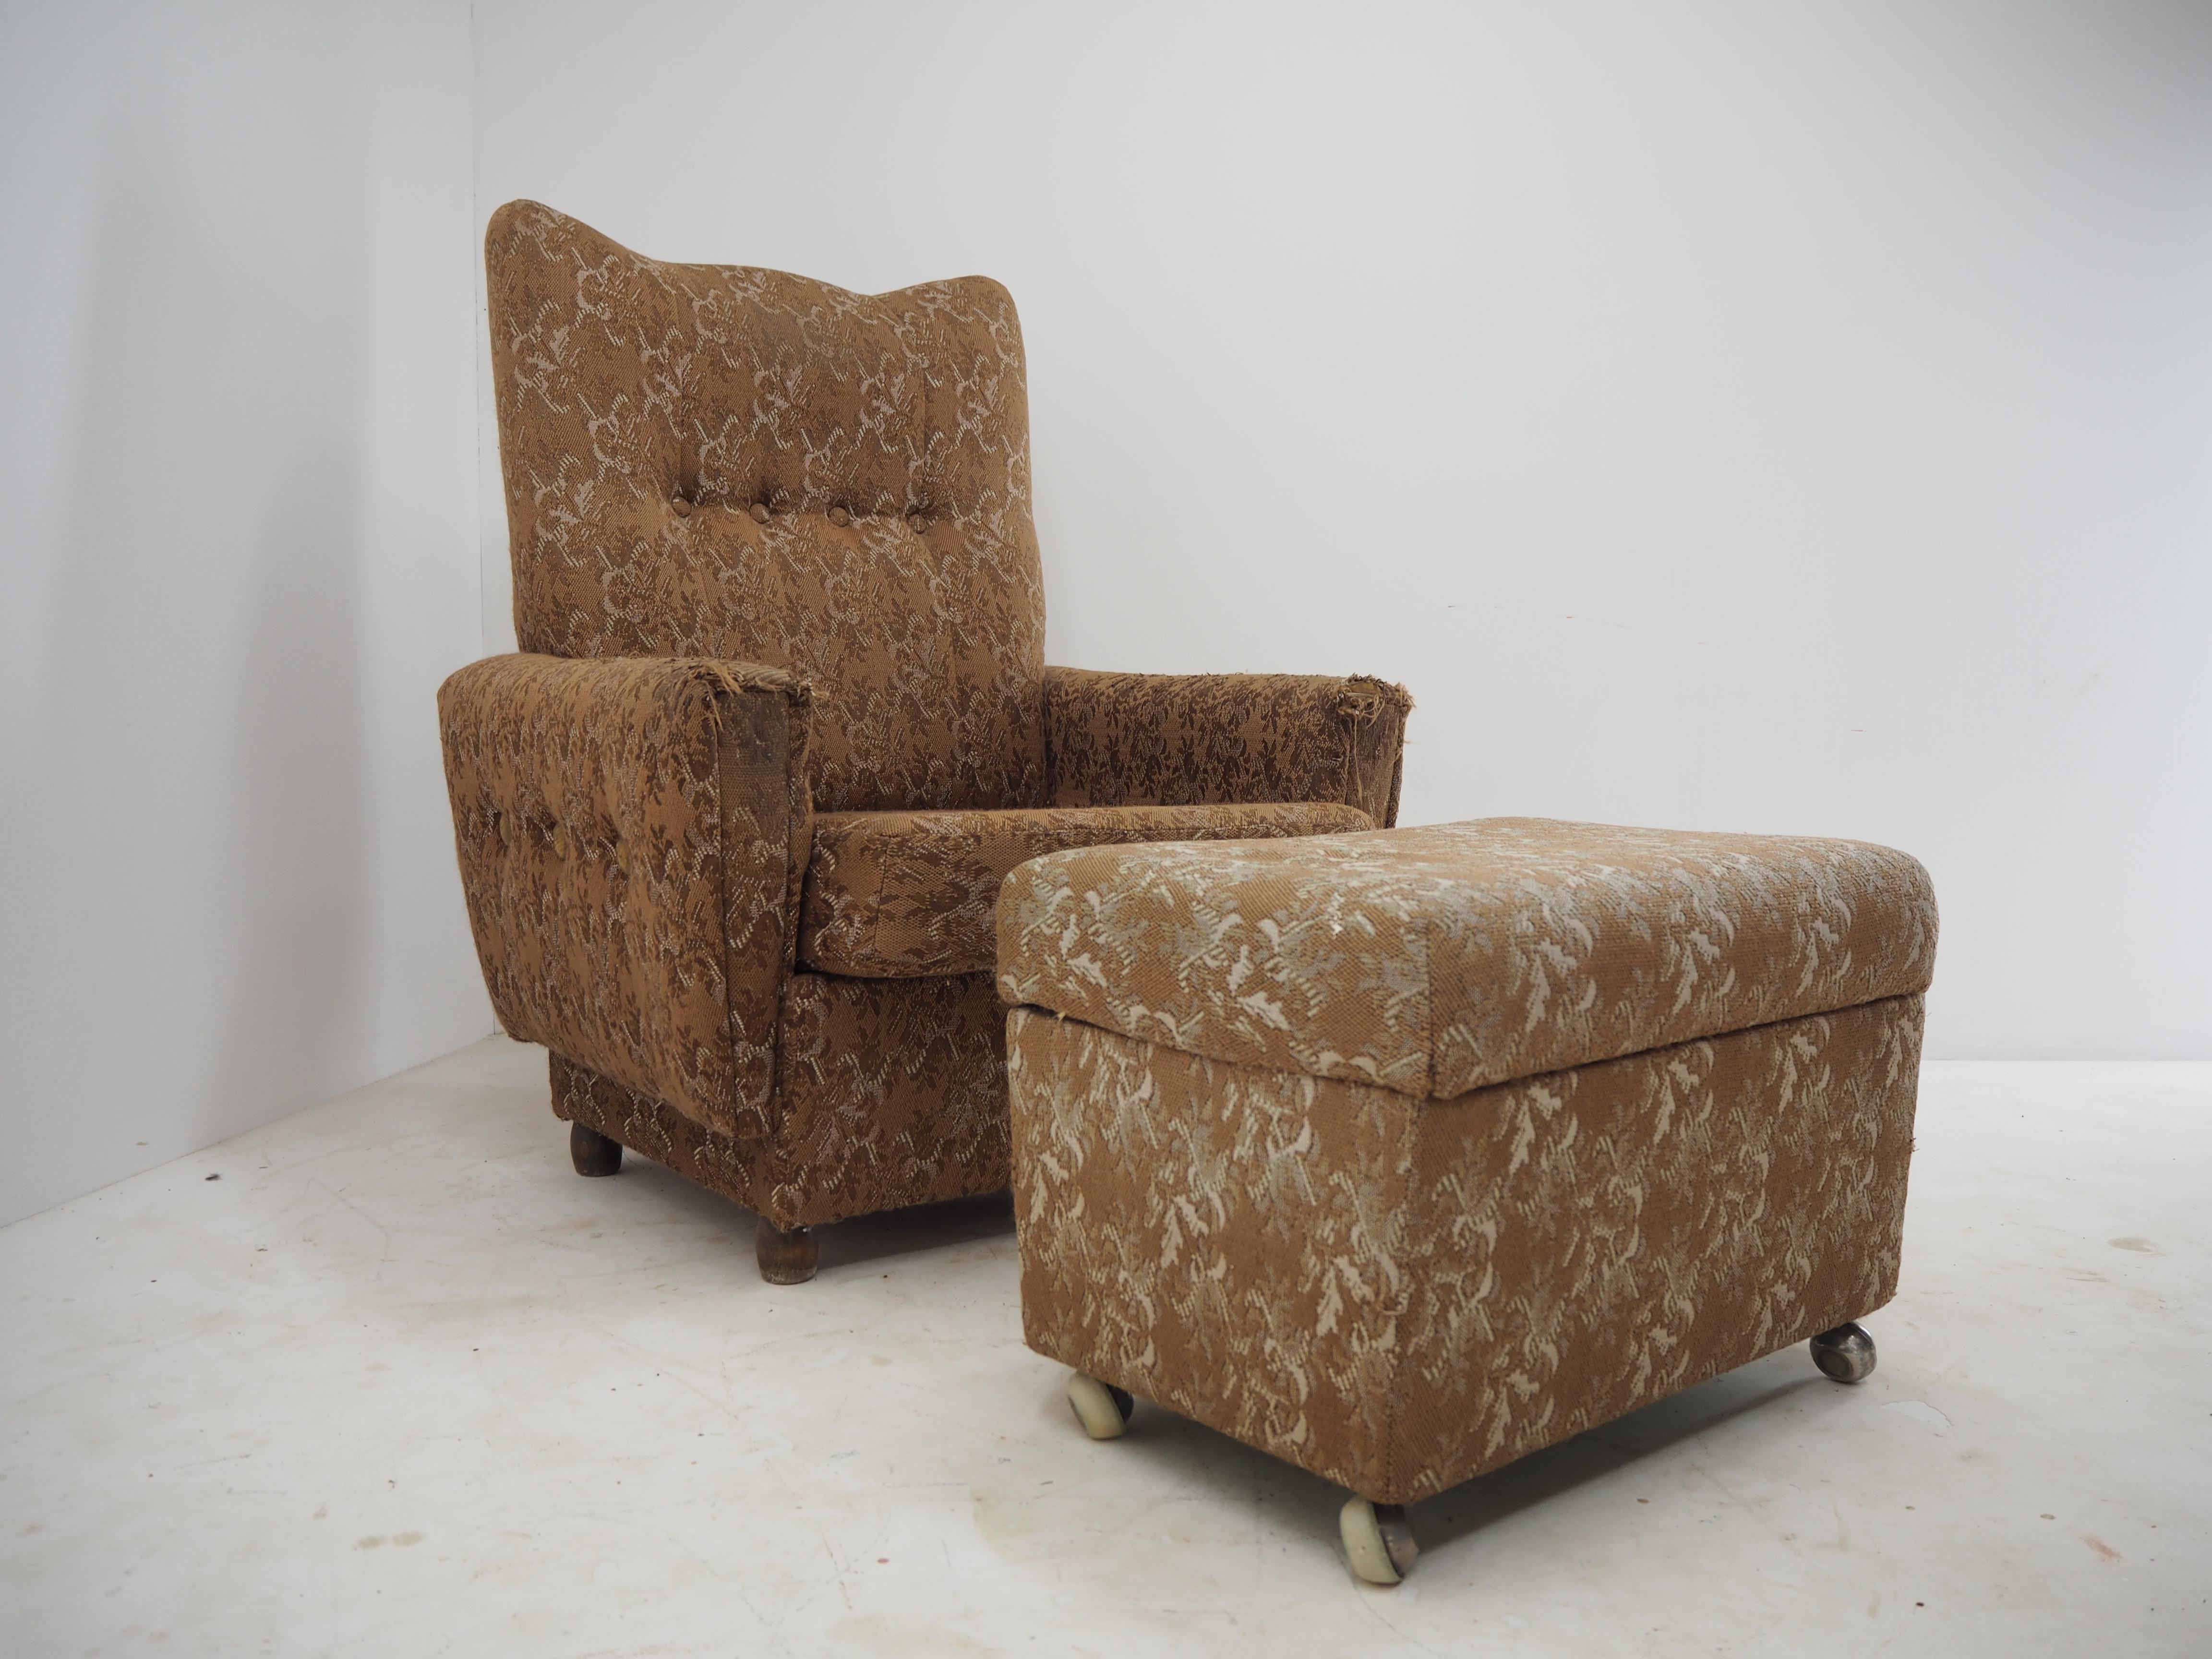 In original condition
need a new upholstery
footstool dimension is 40cm x 58cm x 75cm.